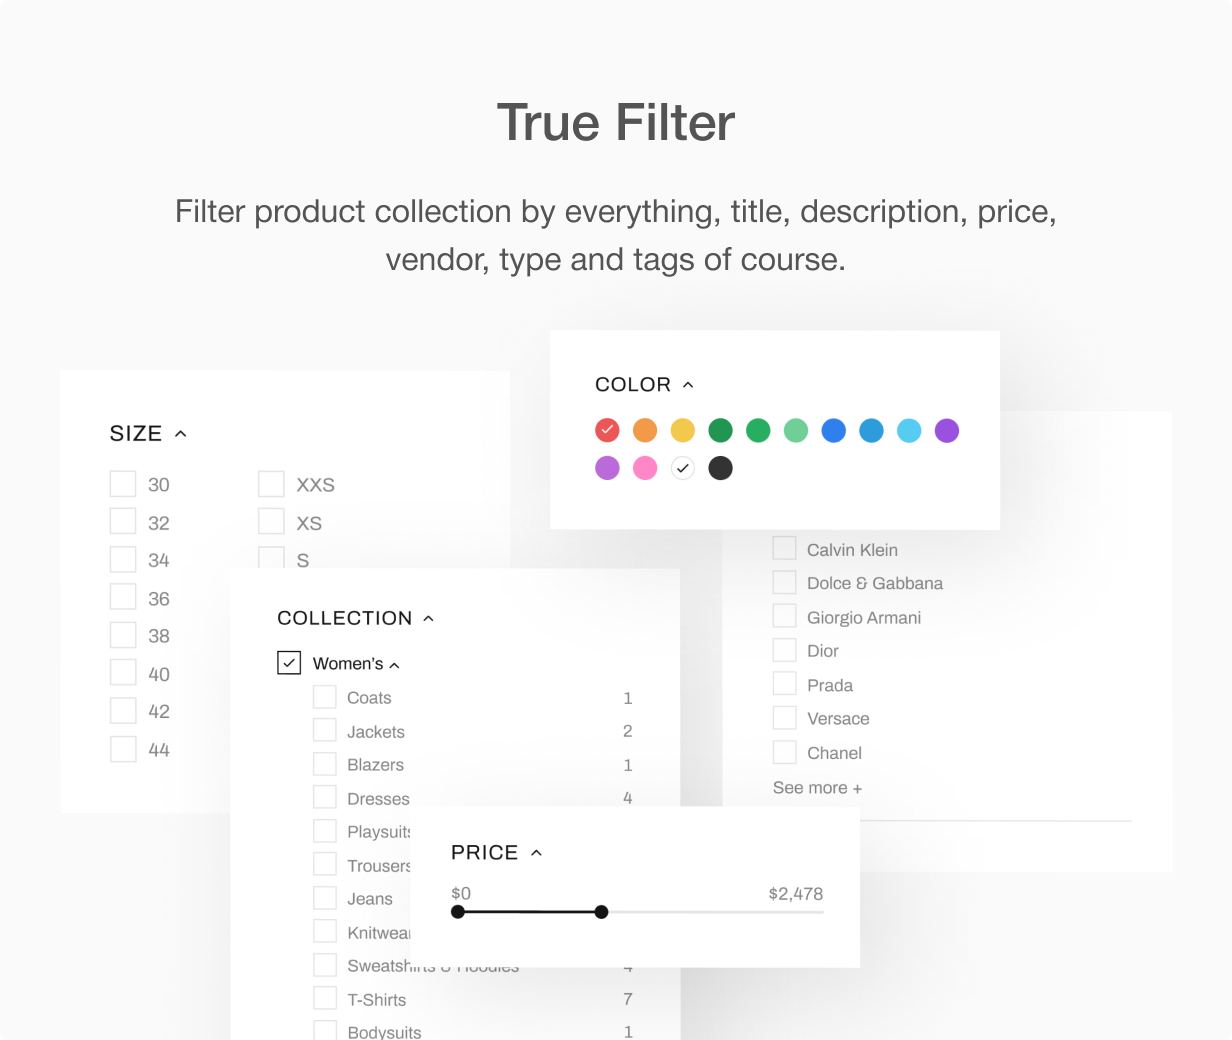 Refine filters by everything at Shella Shopify theme